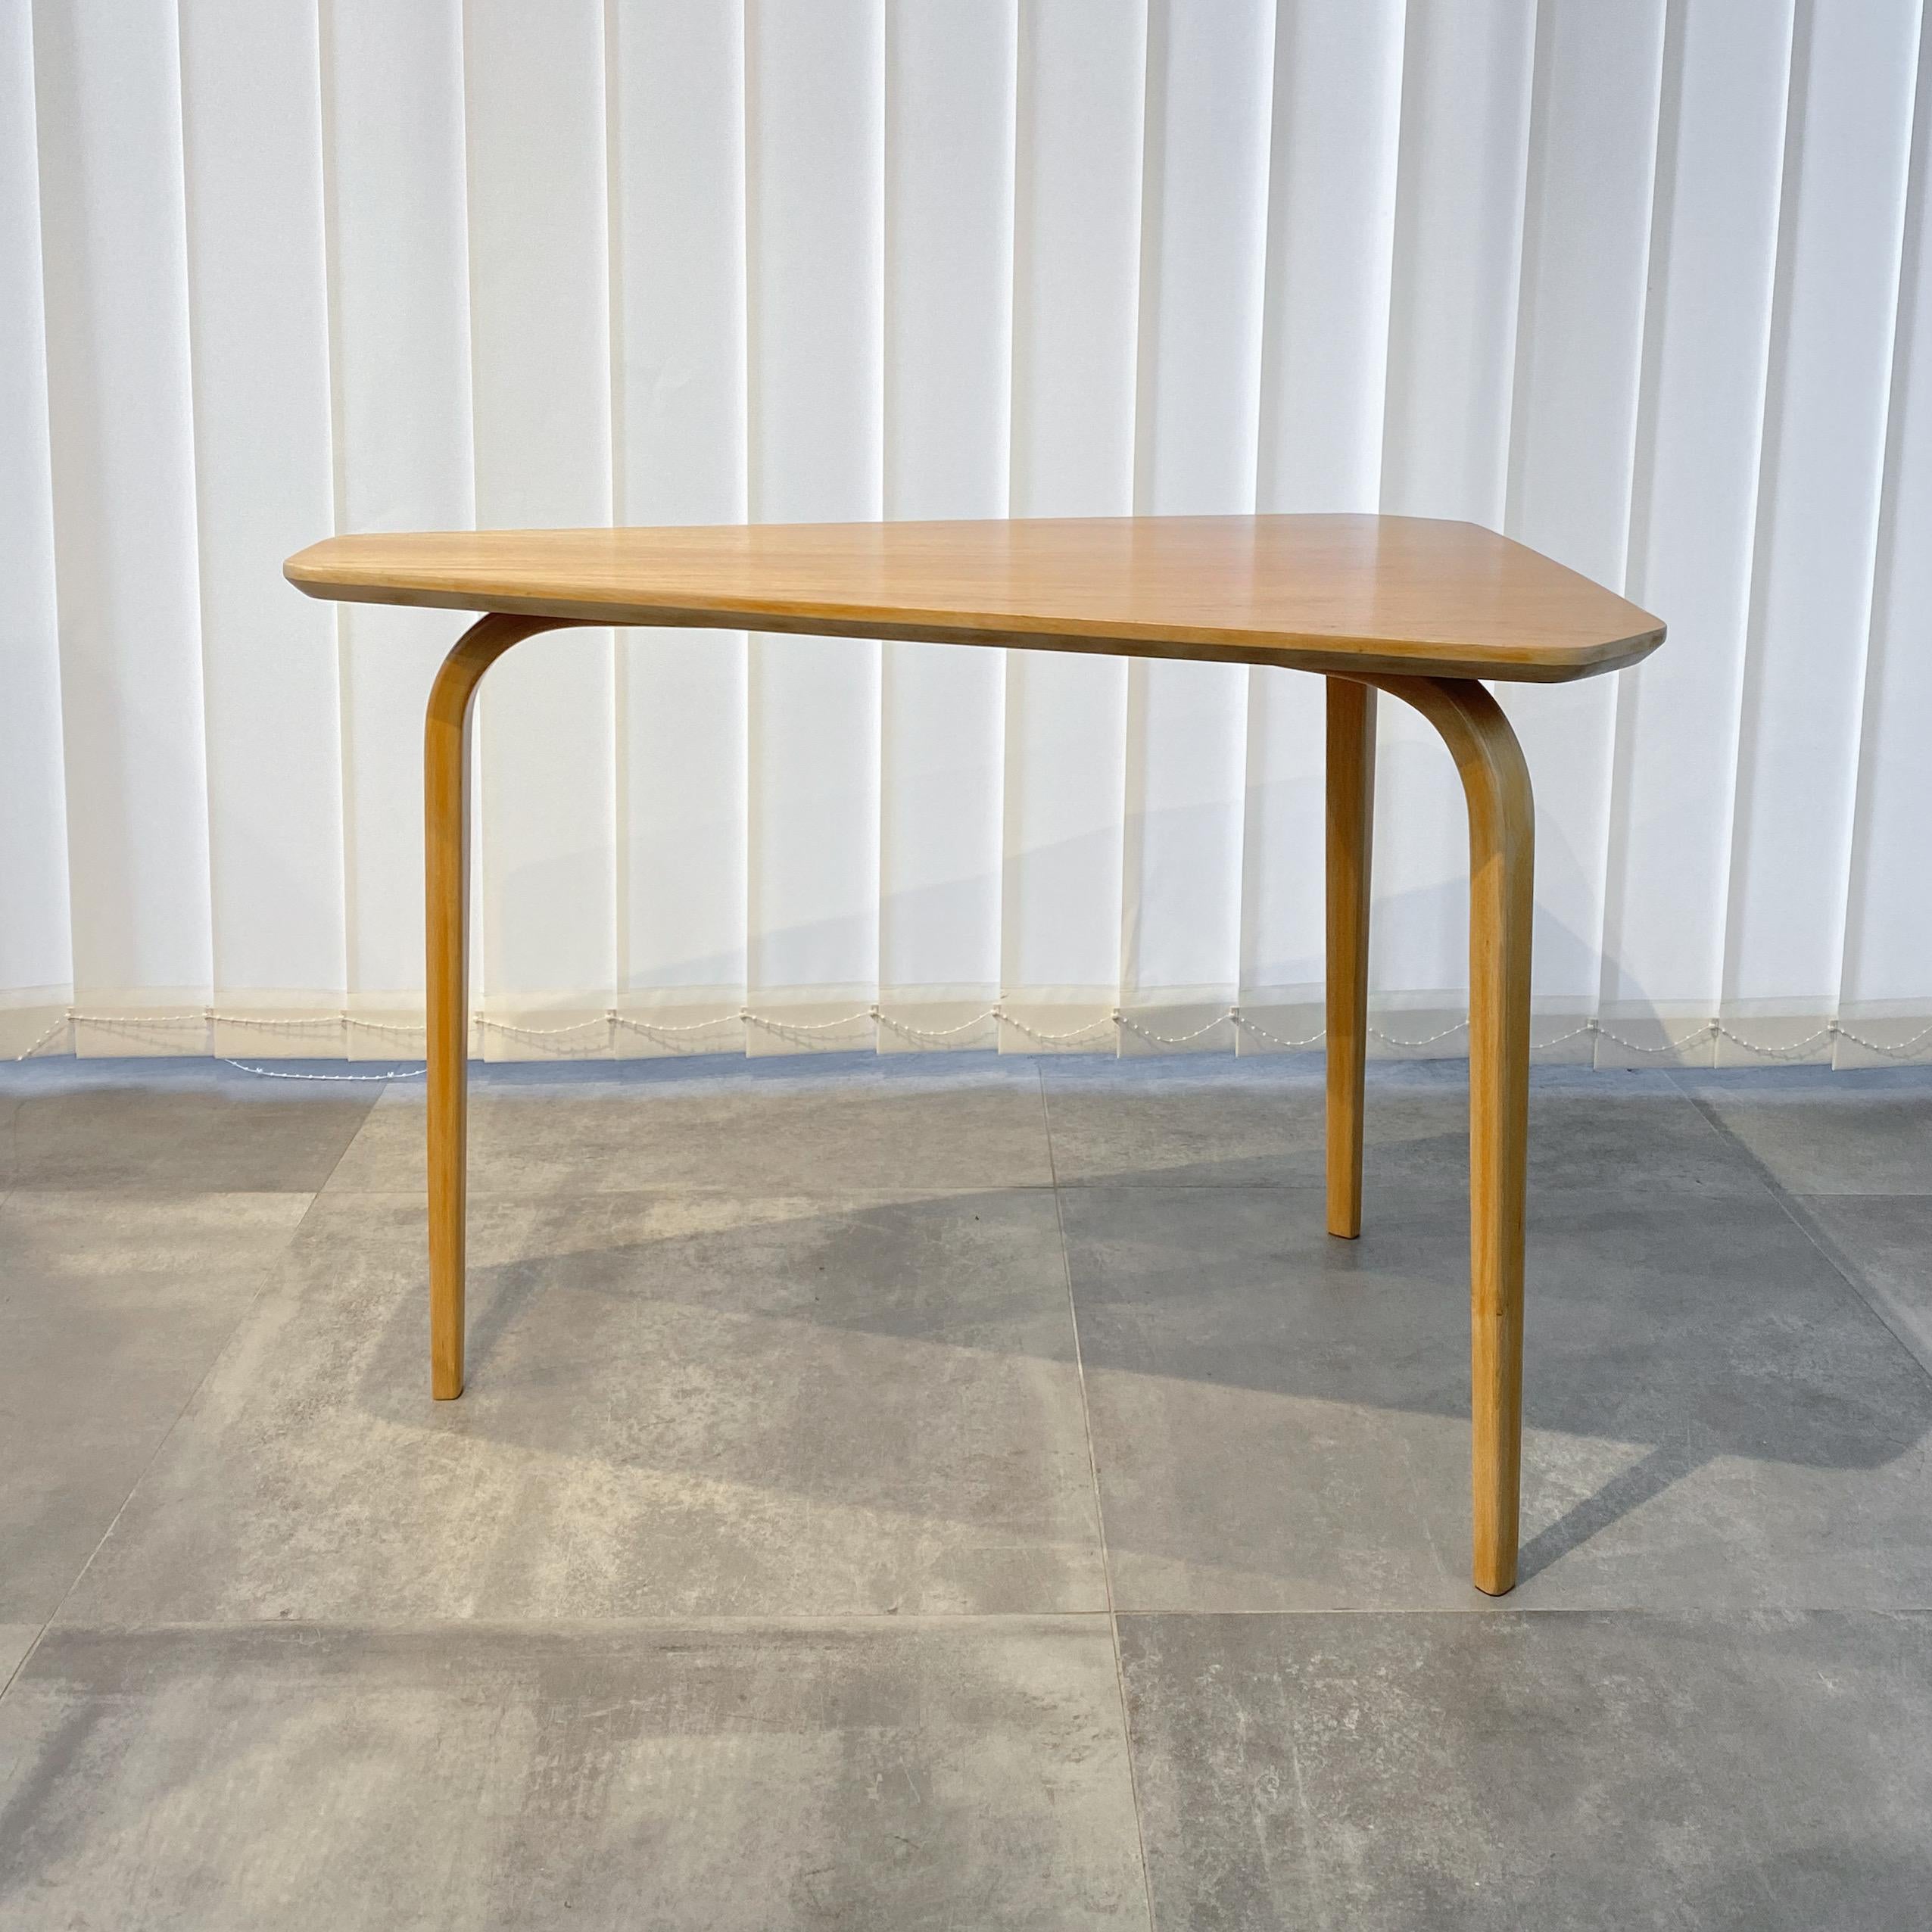 Swedish functionalist coffee table with a triangular tabletop resting on three bentwood legs. The legs are made from solid beech, and the tabletop is covered in elm veneer. Produced by an unidentified Swedish manufacturer in the 1940s, following the